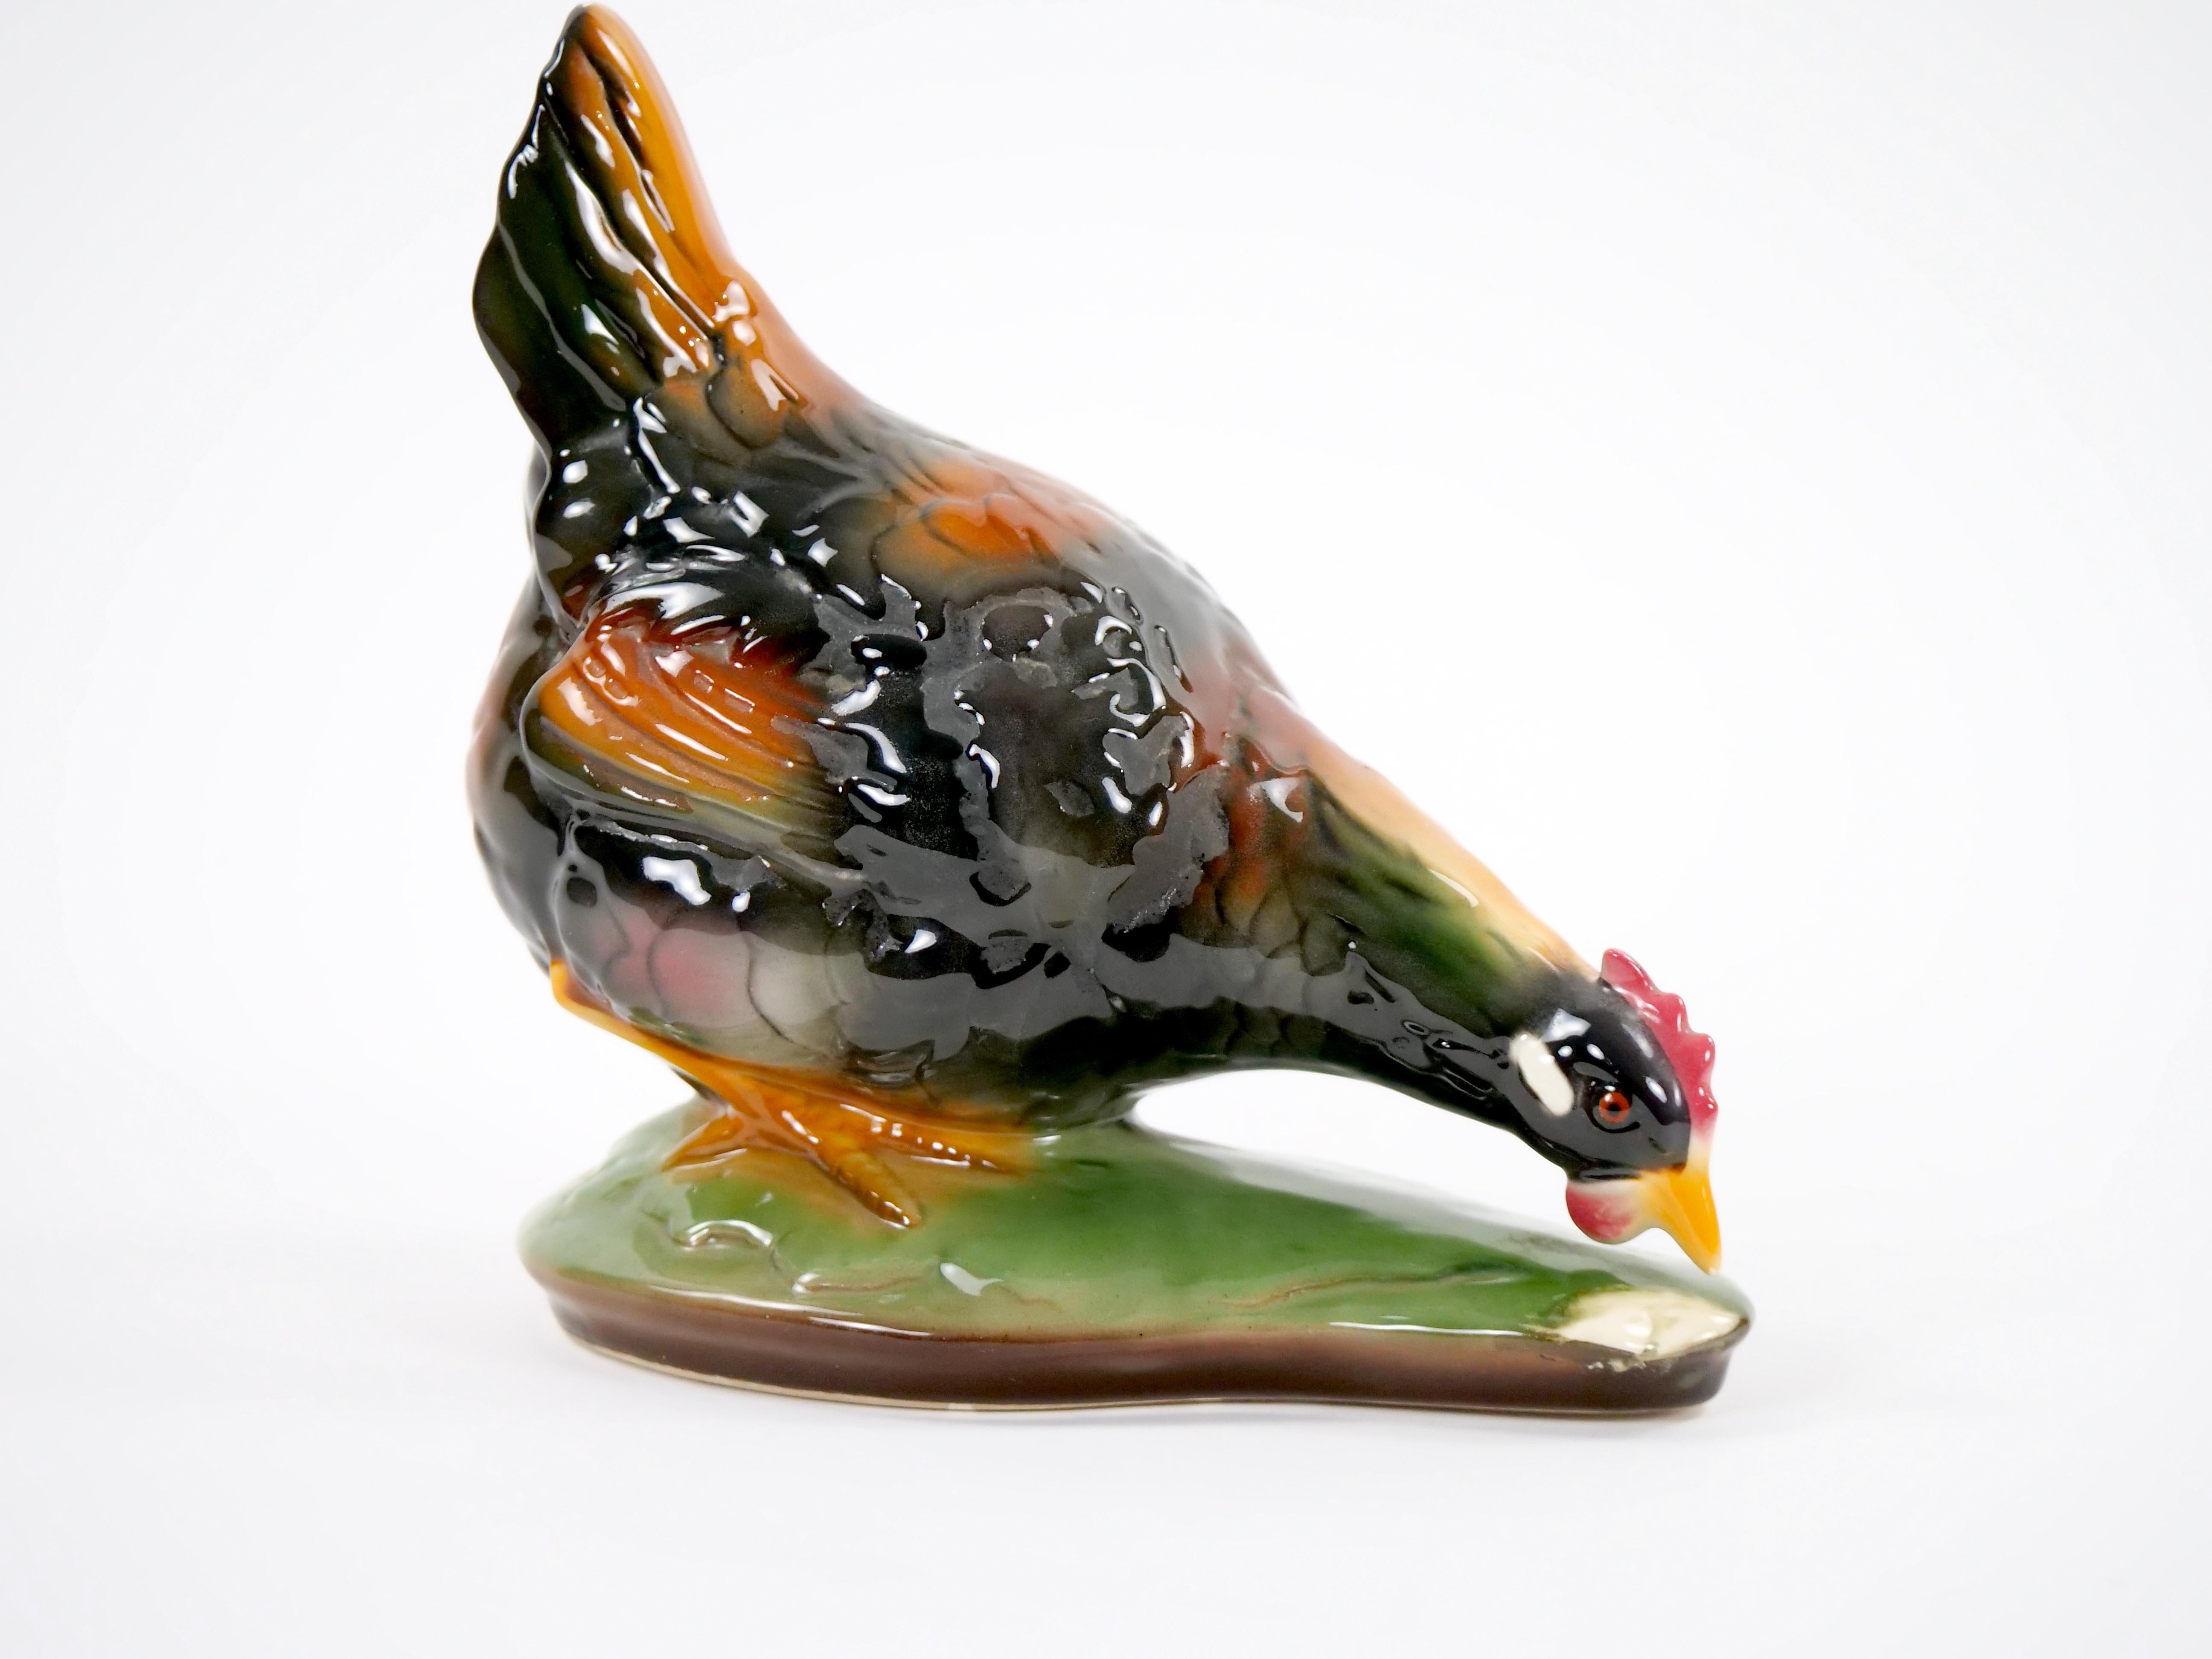 American Hand Grafted / Painted Glazed Porcelain Tableware Decorative Sculpture For Sale